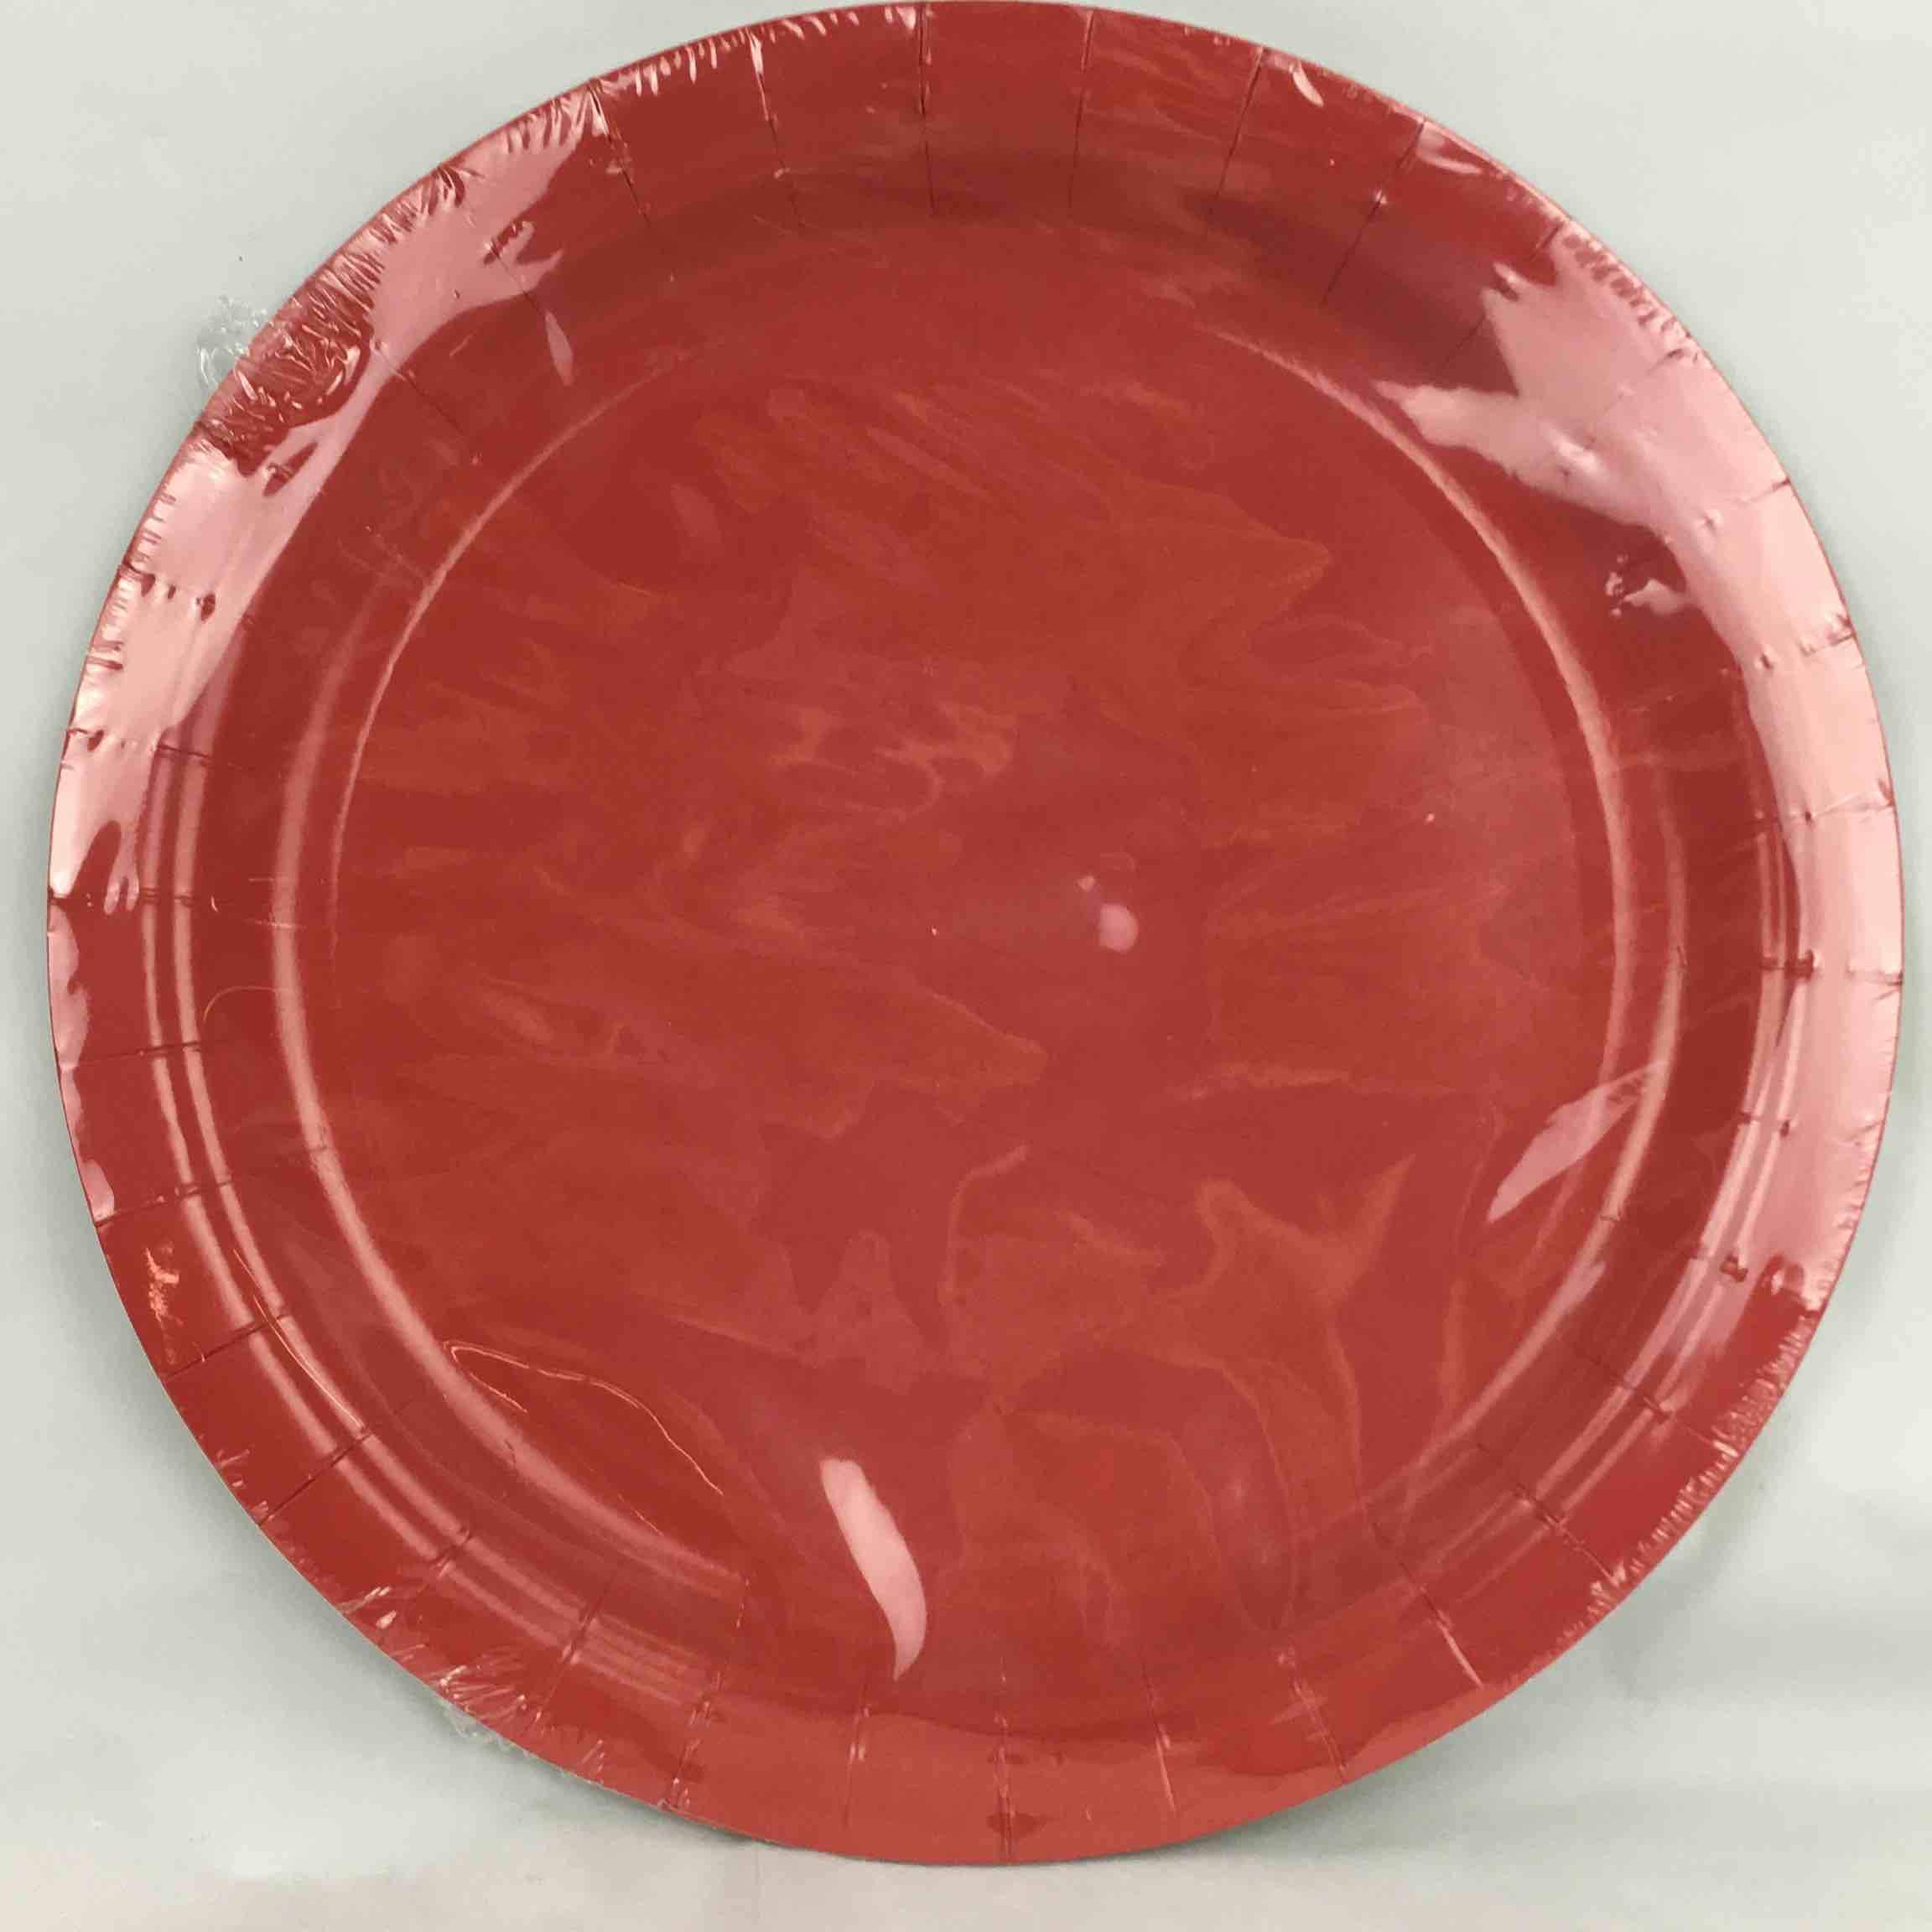 SOLID RED PLATES 9in  8pcs